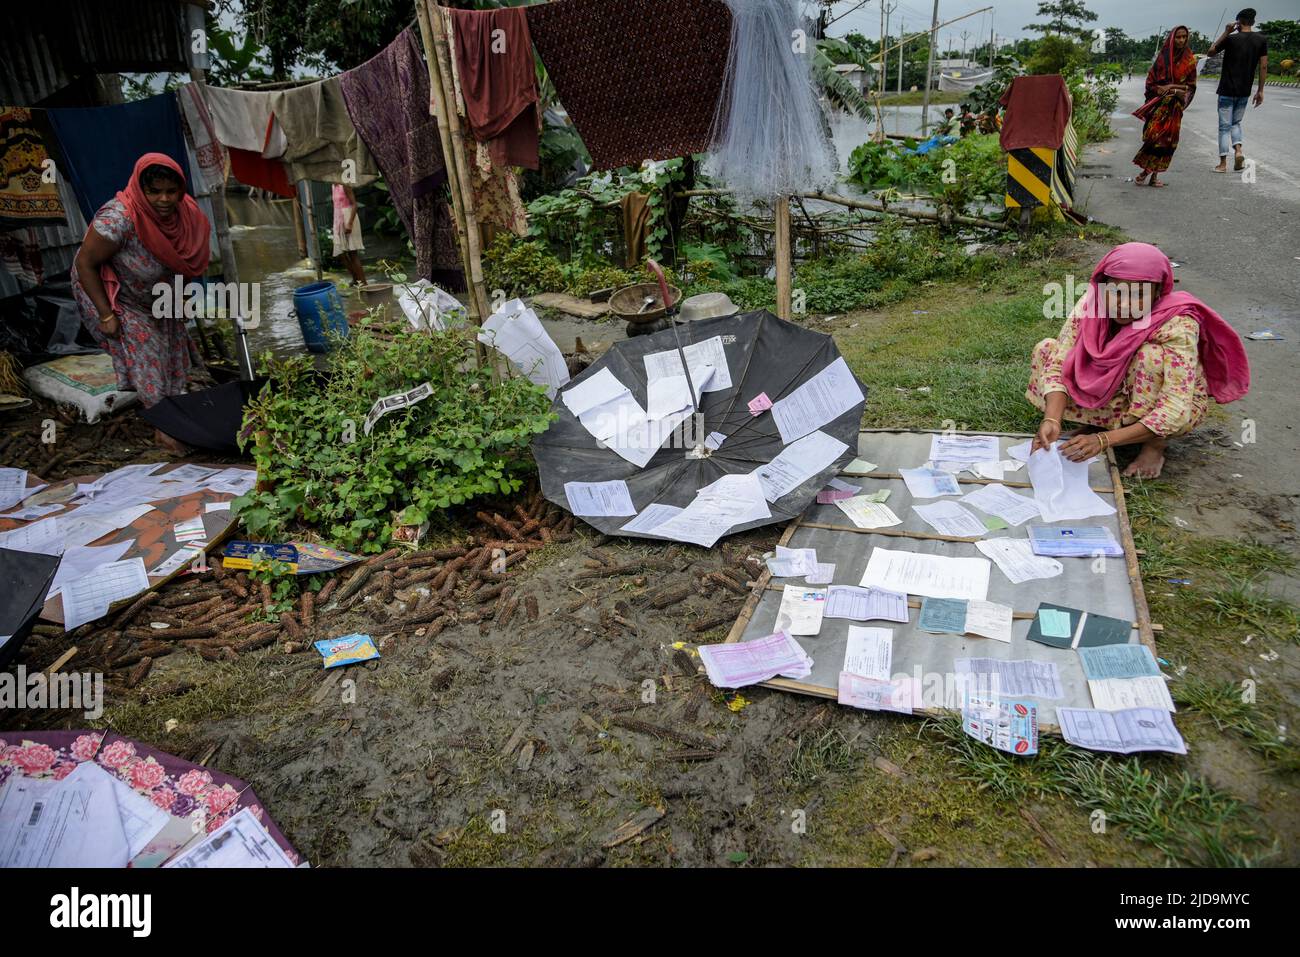 Women dry documents near a highway after their house submerged in flood water, at a village on June 17, 2022 in Barpeta, India. Assam flood situation deteriorates due to heavy rain, over a million people affected. Stock Photo